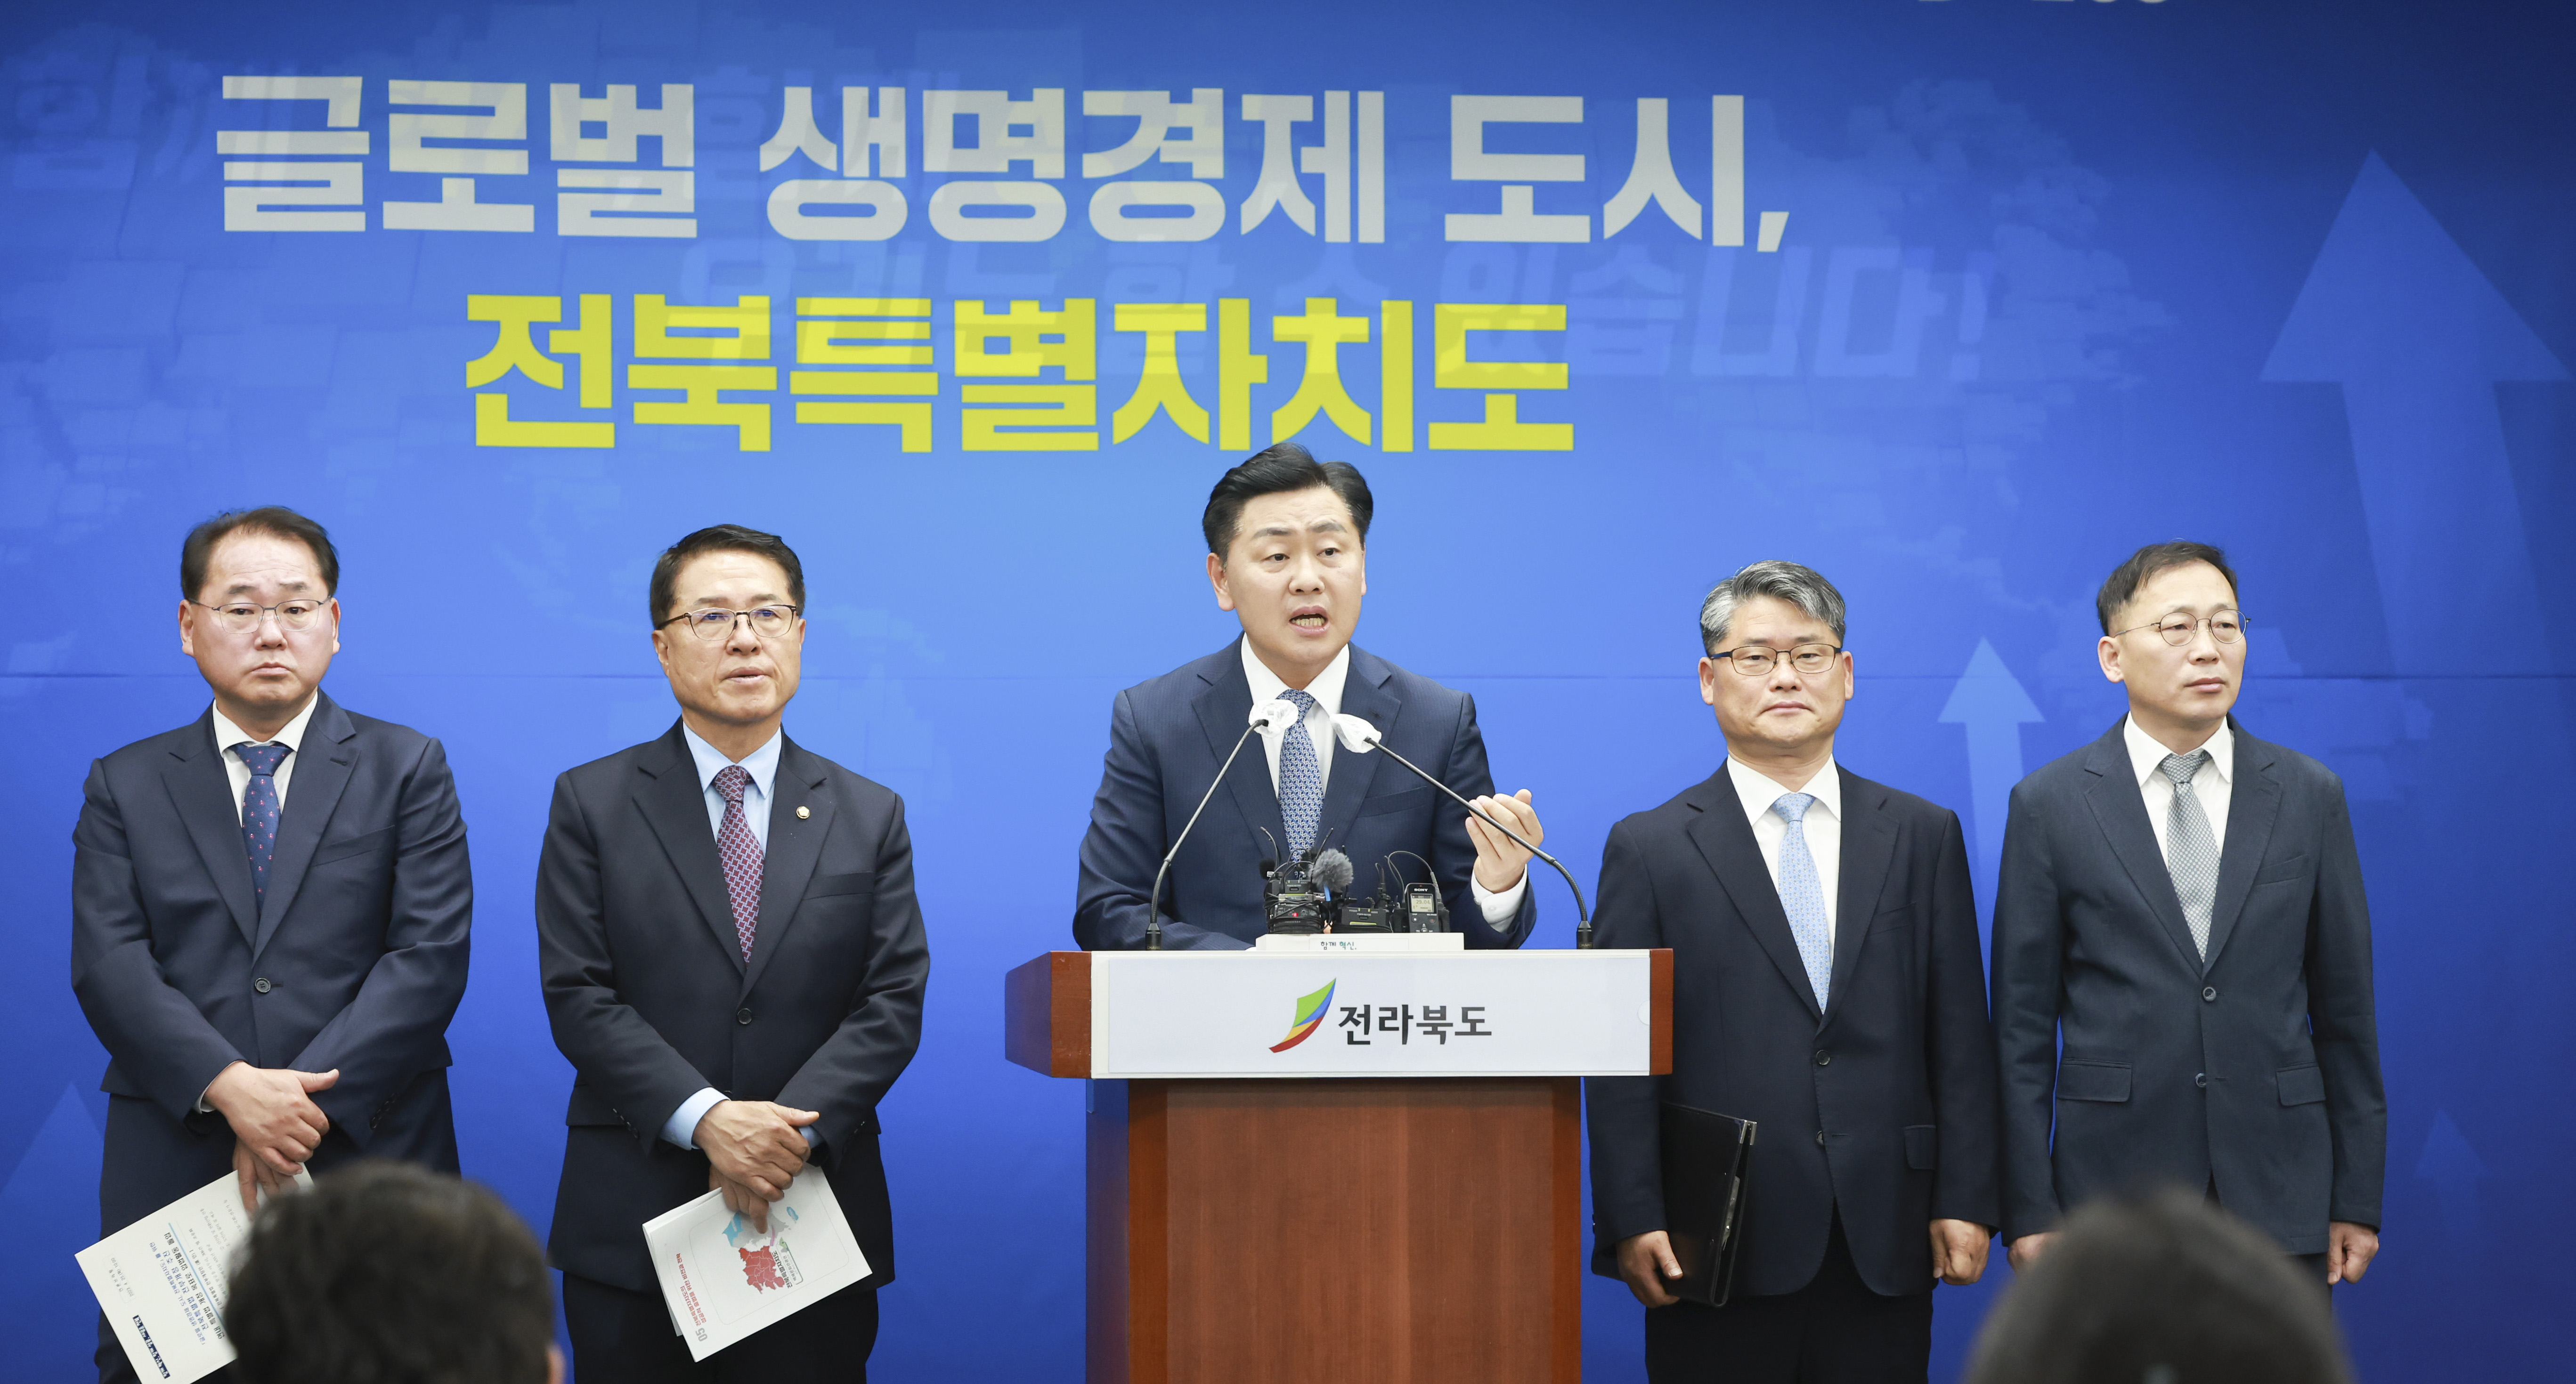 Jeollabuk-do Pushes up with Revising All Jeonbuk Special Laws within This Year to Take off as a New Jeonbuk image(1)